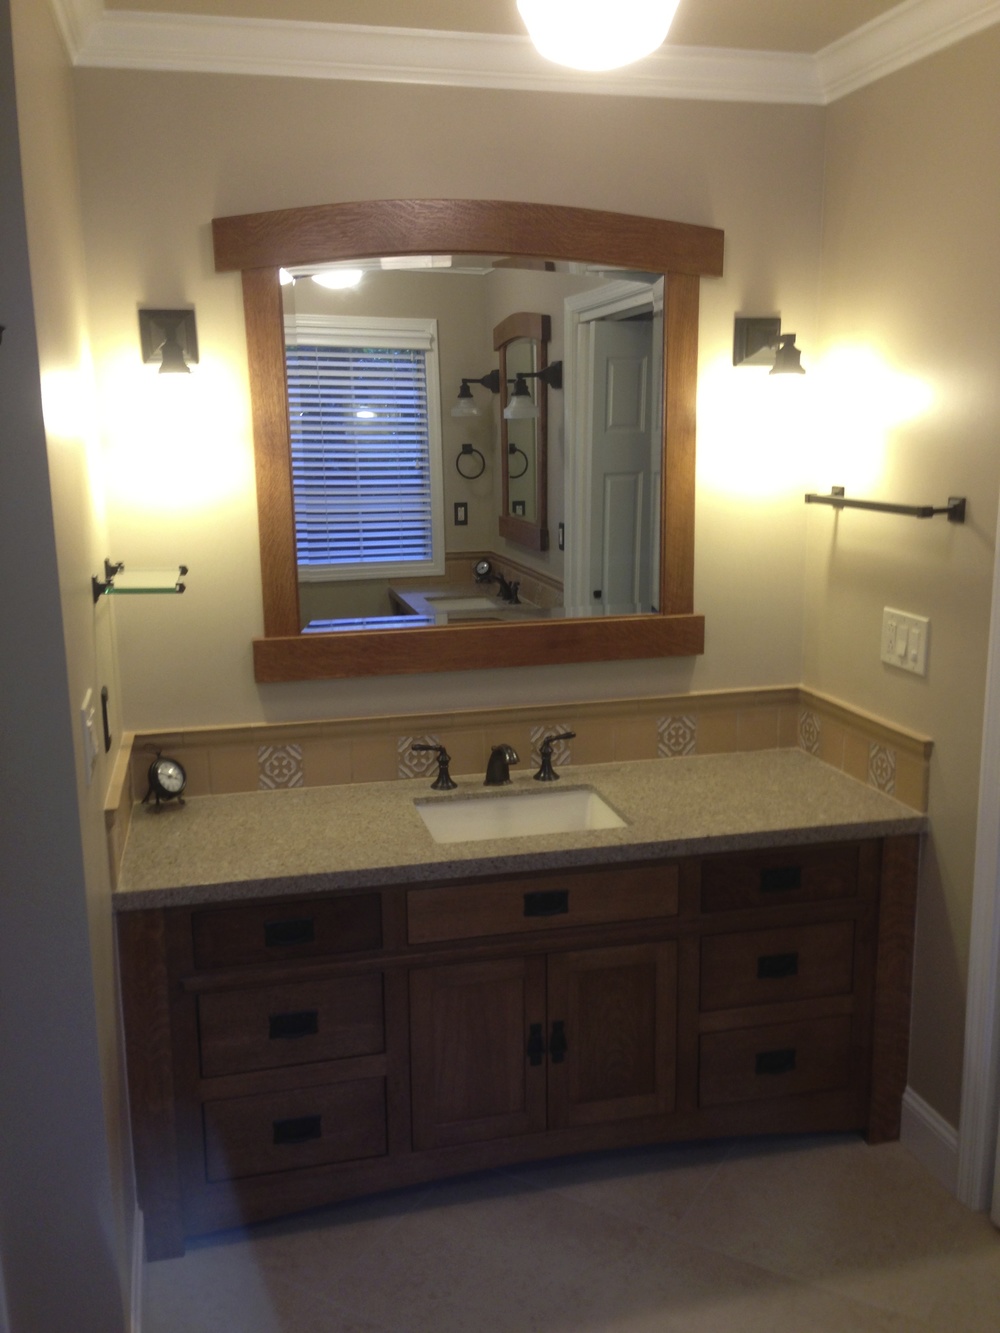 1970’s bathroom gets a complete makeover with fully custom cabinets and matching mirrors